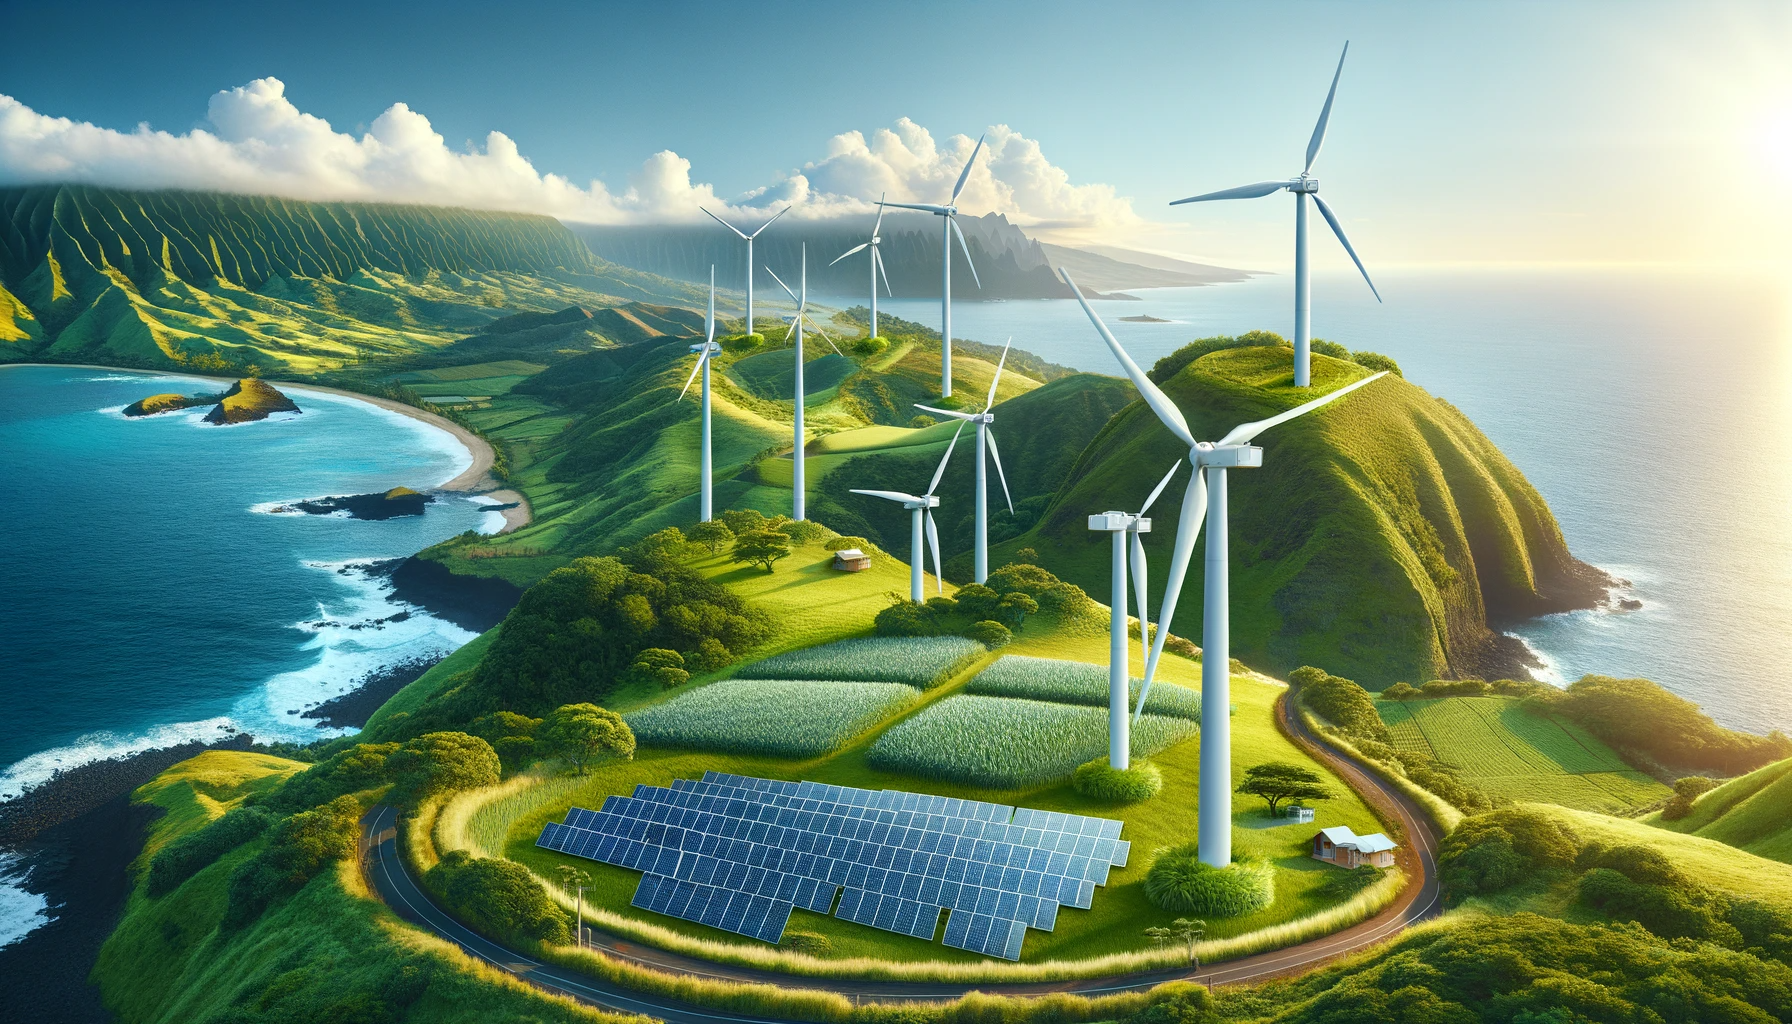 Artistic illustration depicting Hawaii's coastline adorned with wind turbines and solar panels, visualizing the potential for clean energy advancements throughout the state.